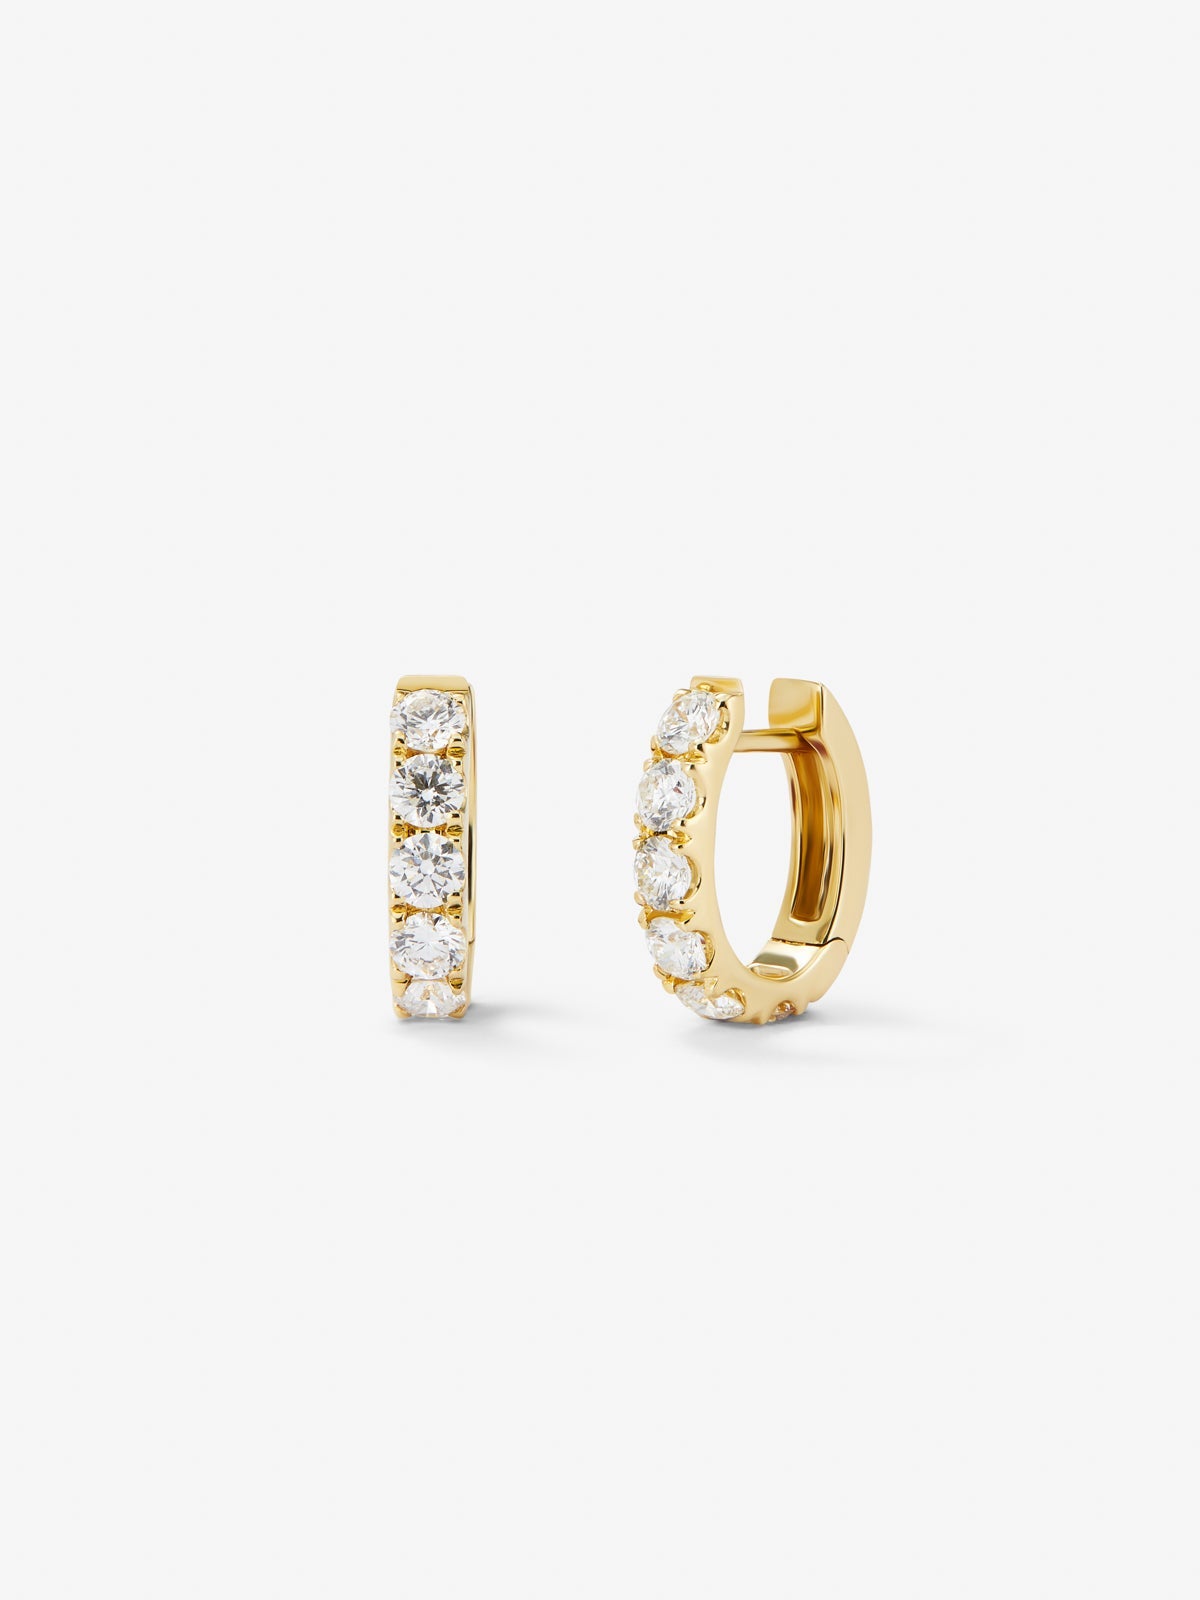 18K yellow gold hoop earrings with 12 brilliant-cut white diamonds with a total of 0.91 cts